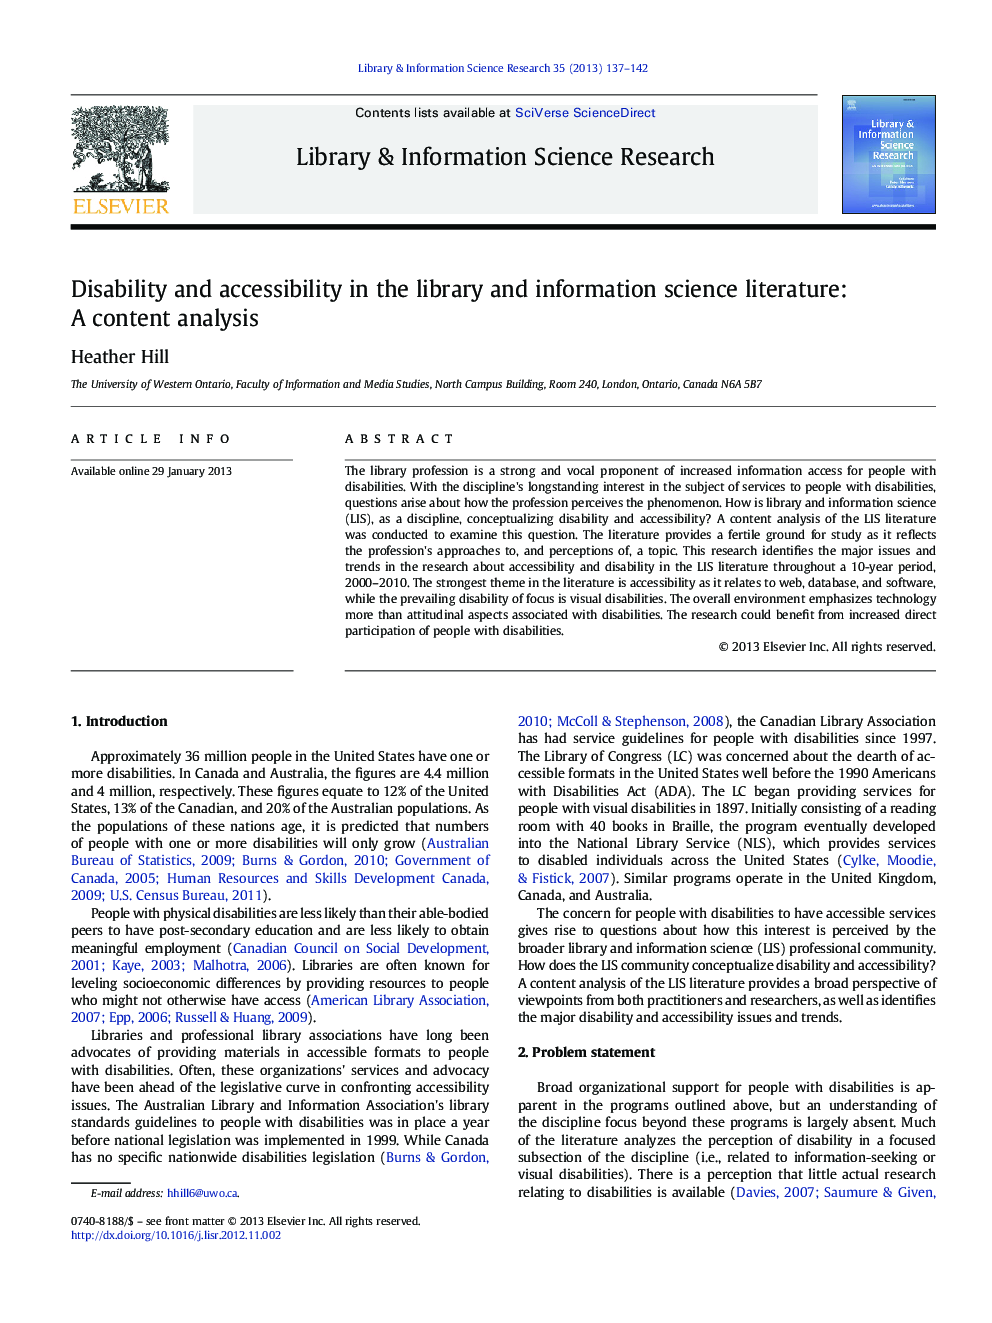 Disability and accessibility in the library and information science literature: A content analysis